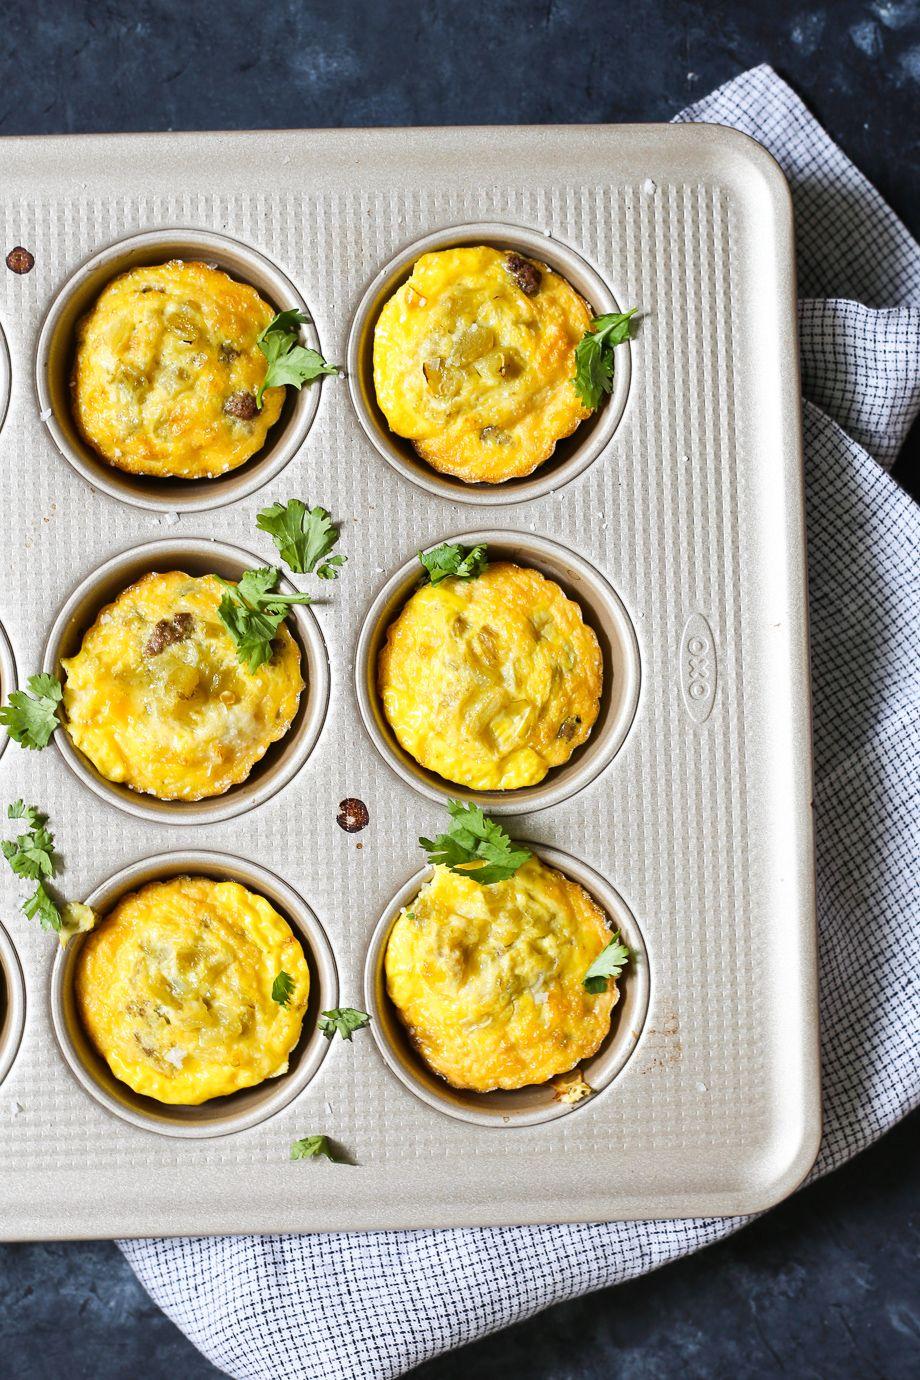 Make Ahead Items Green Chile Beef Egg Cups 1 tablespoon olive oil 1/4 small white onion, diced fine 1/2 pound ground beef (preferably grassfed) 1 (4oz) can Chopped Green Chiles 1 teaspoon kosher salt